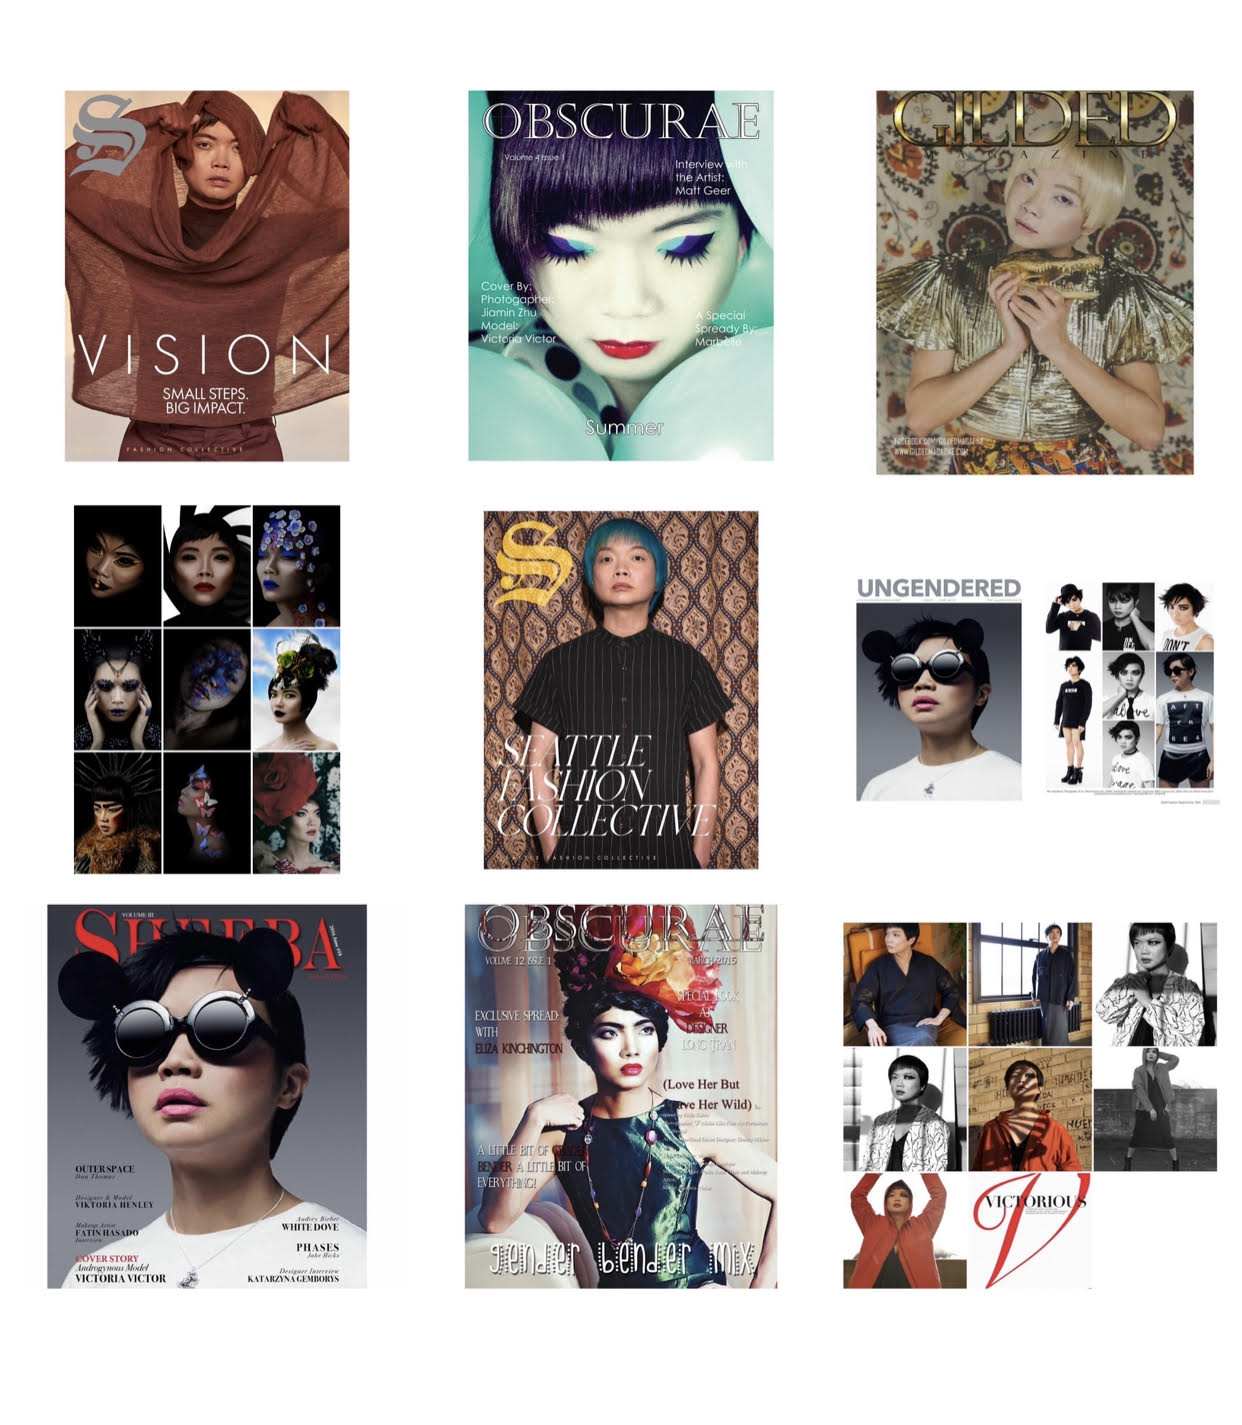 A collage of magazine covers all featuring photos of Victor Loo, a young Asian individual.